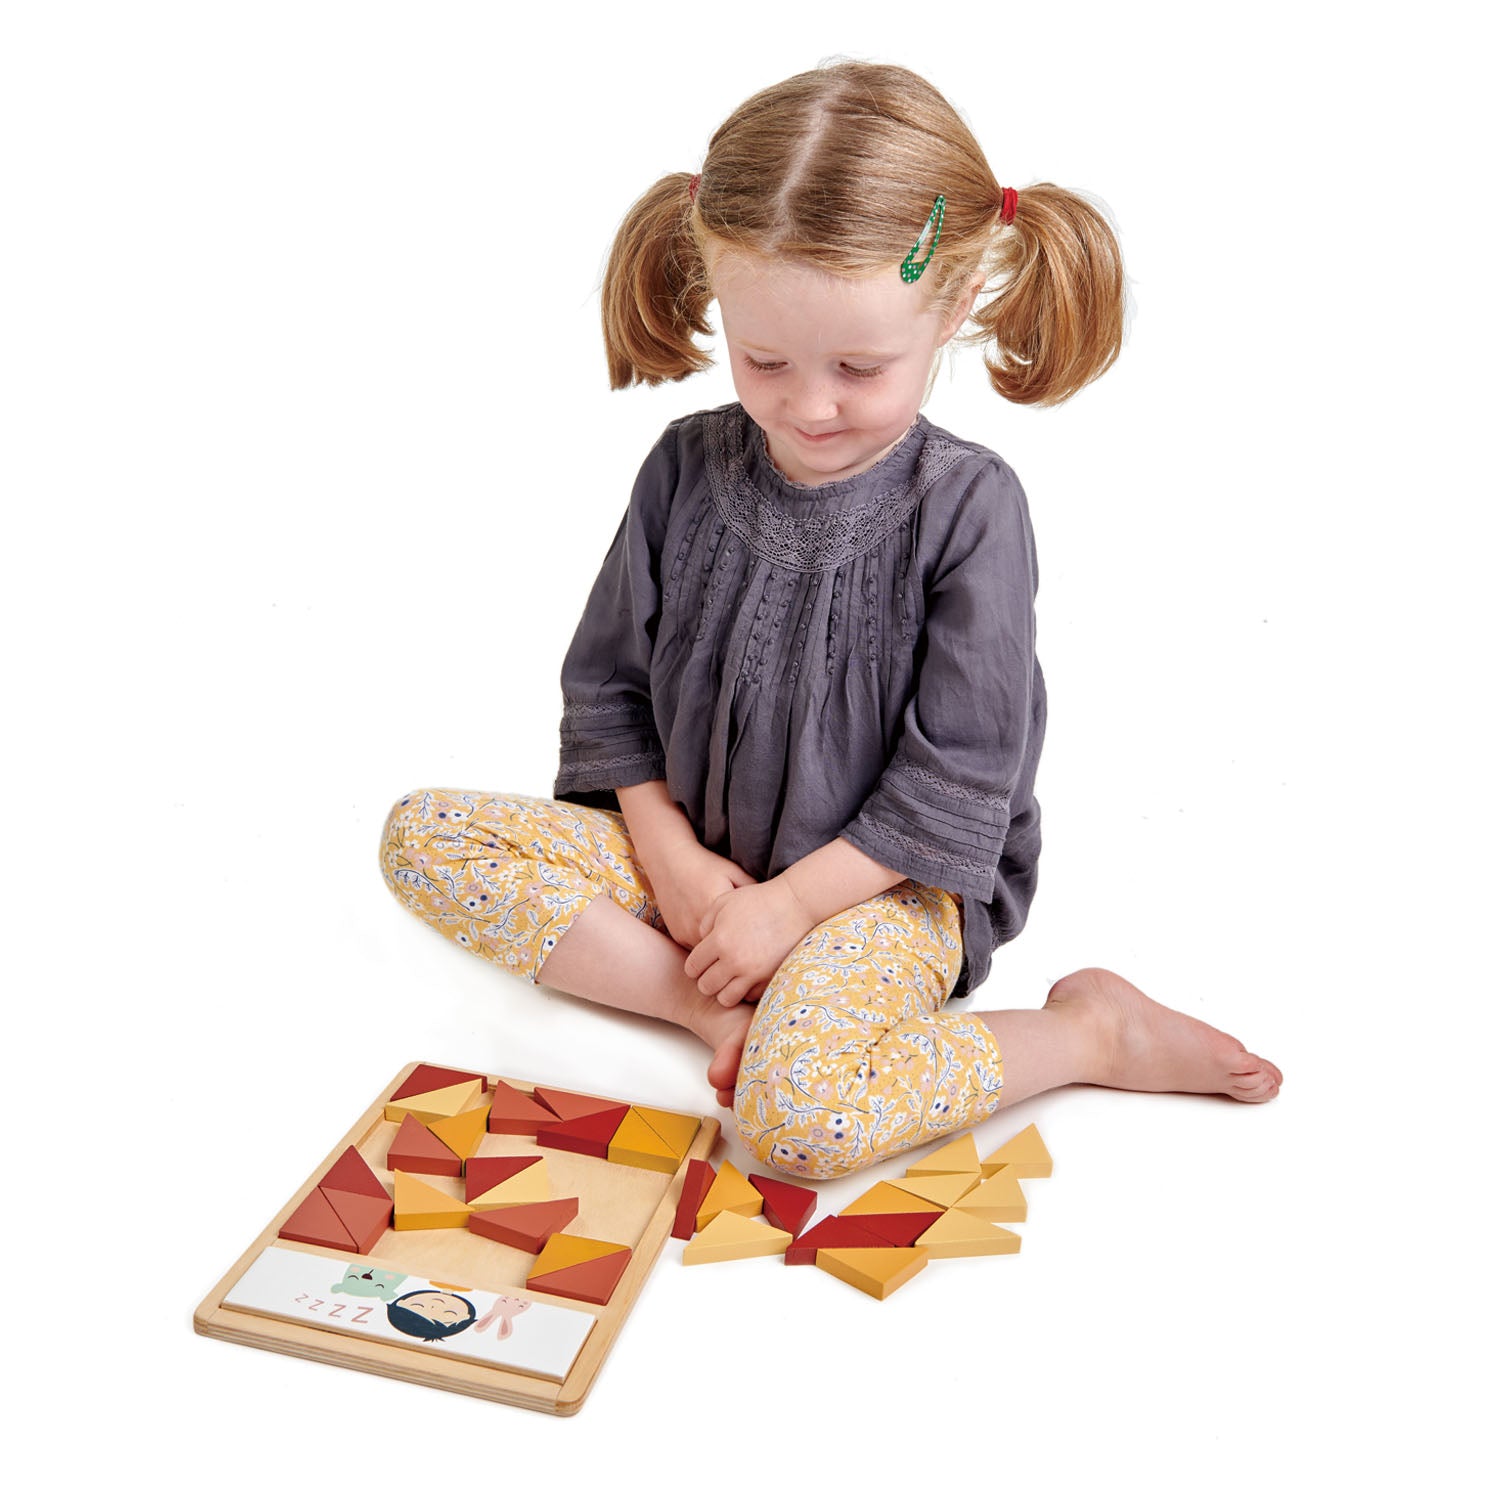 Girl playing with wooden puzzle